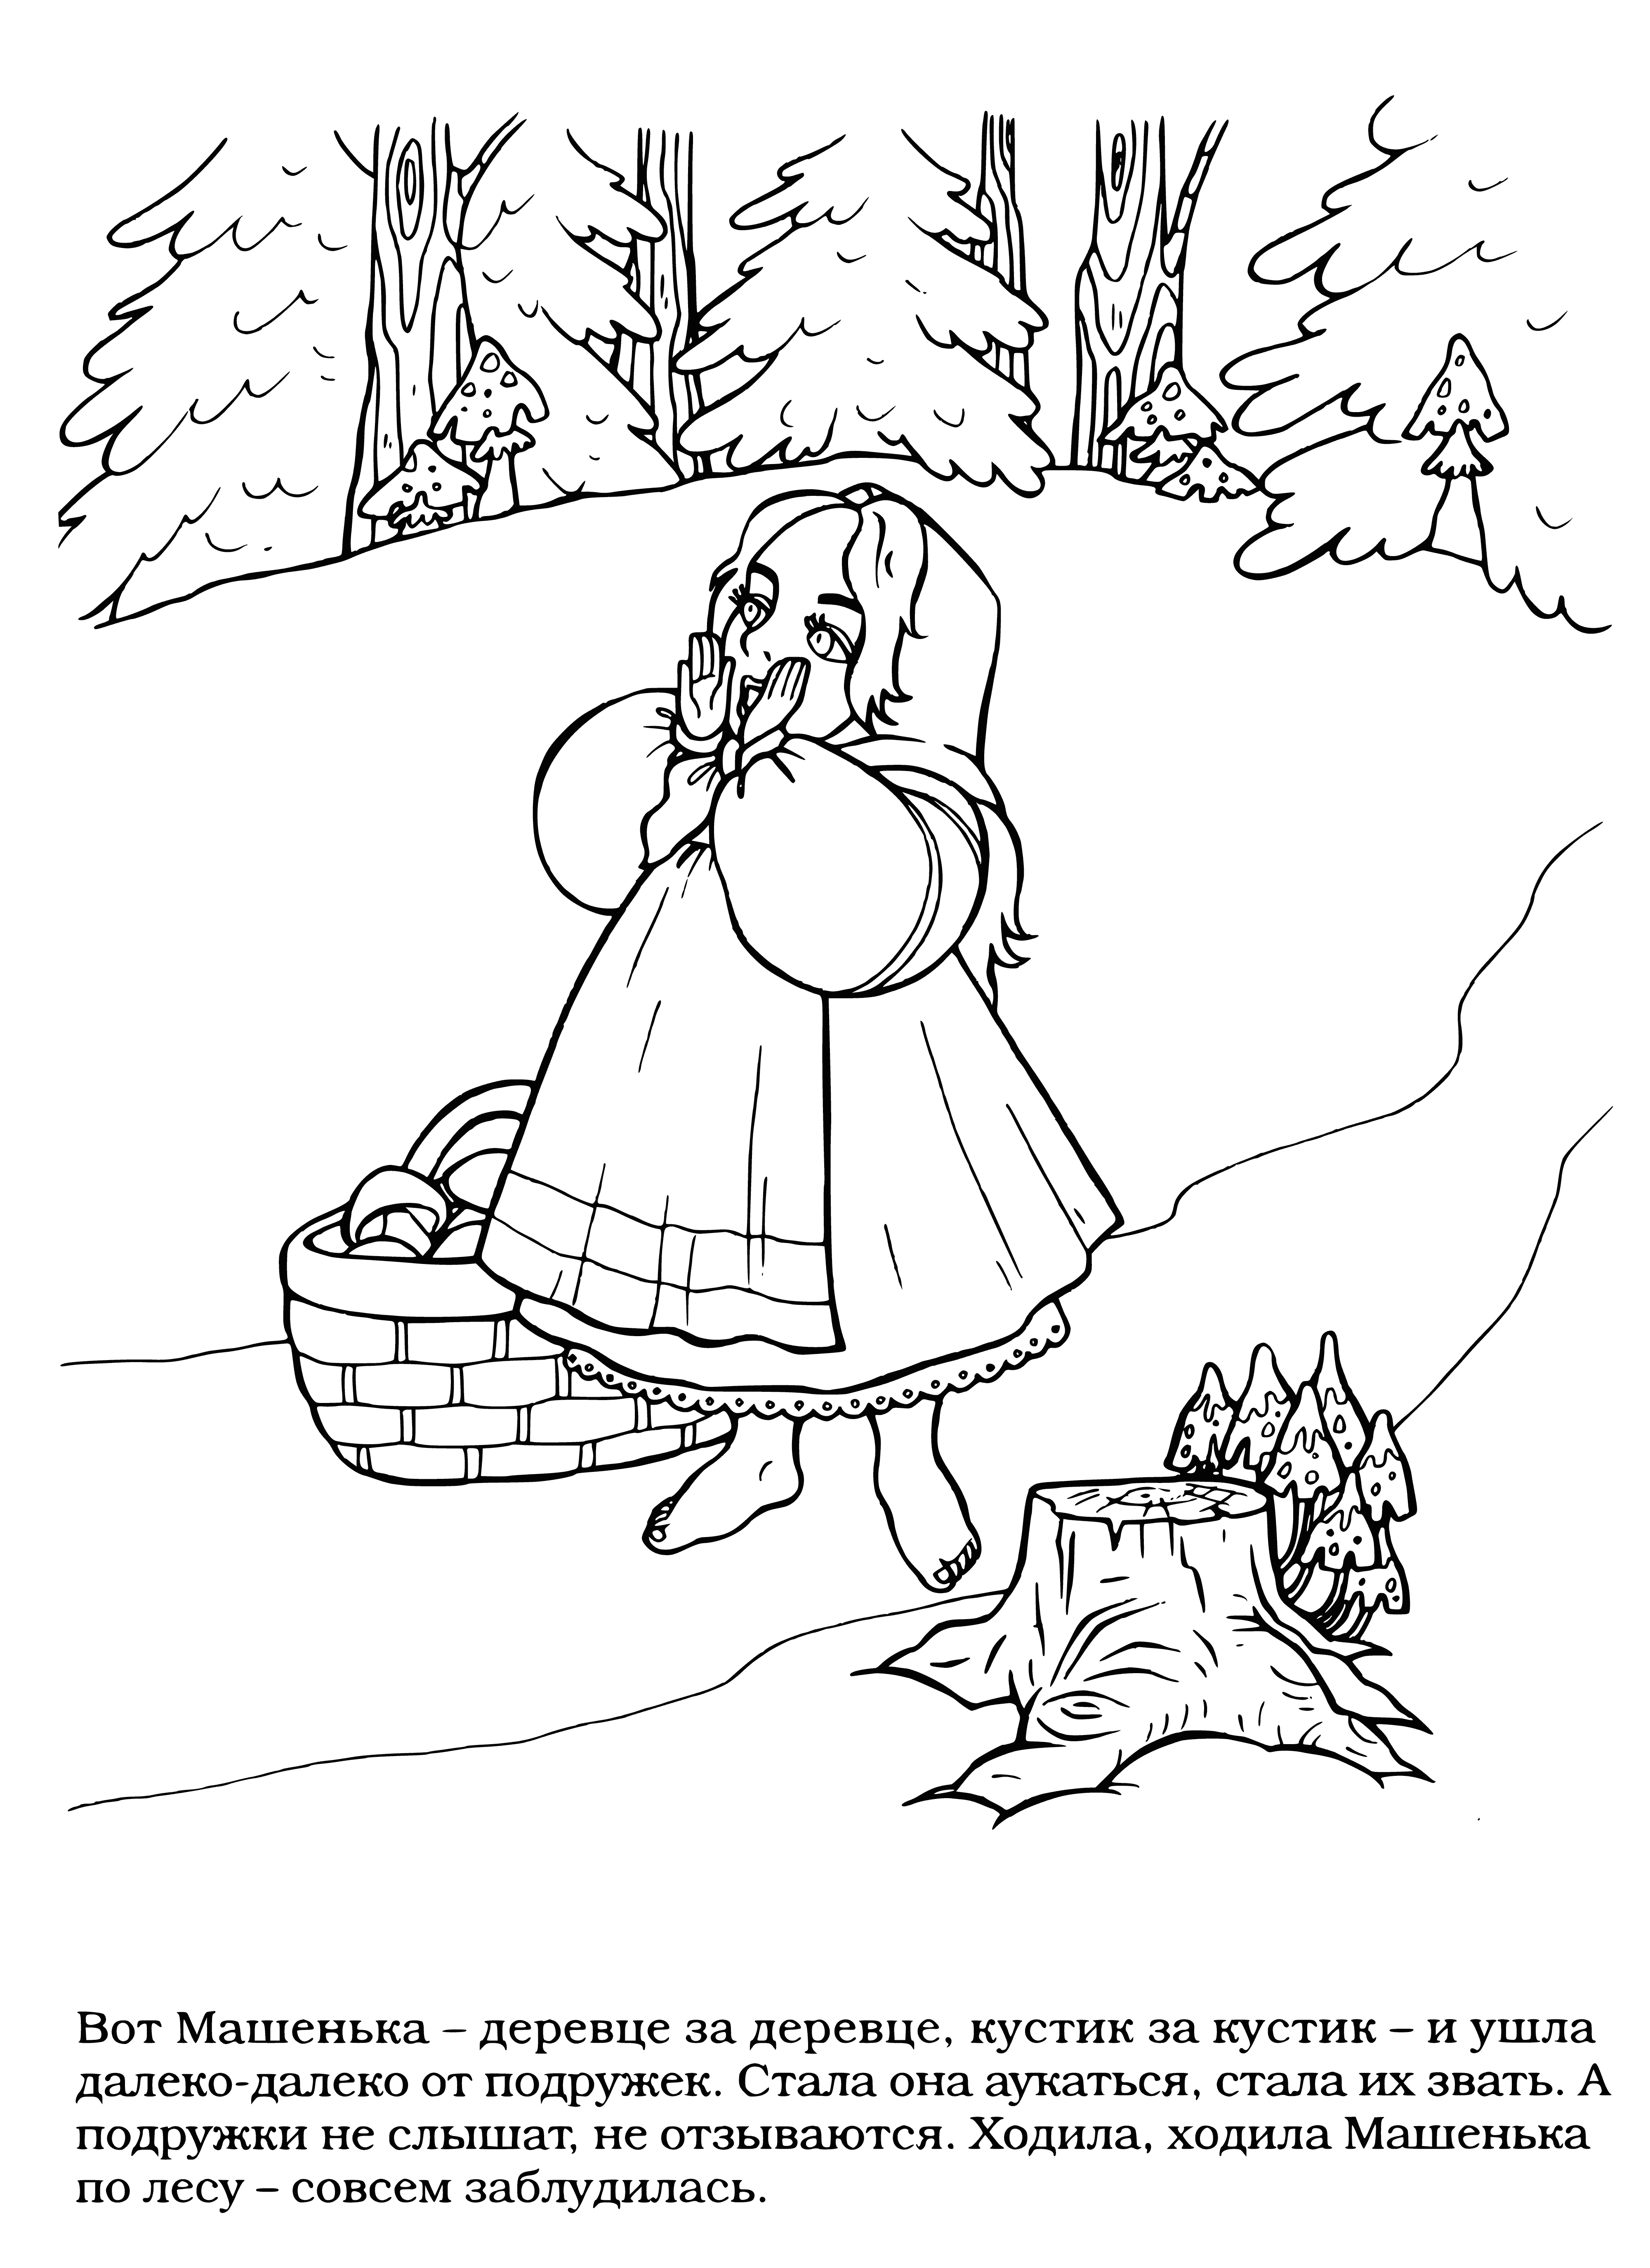 coloring page: Lost girl in red coat stands in snow, tree-surrounded. Small cabin in distance.